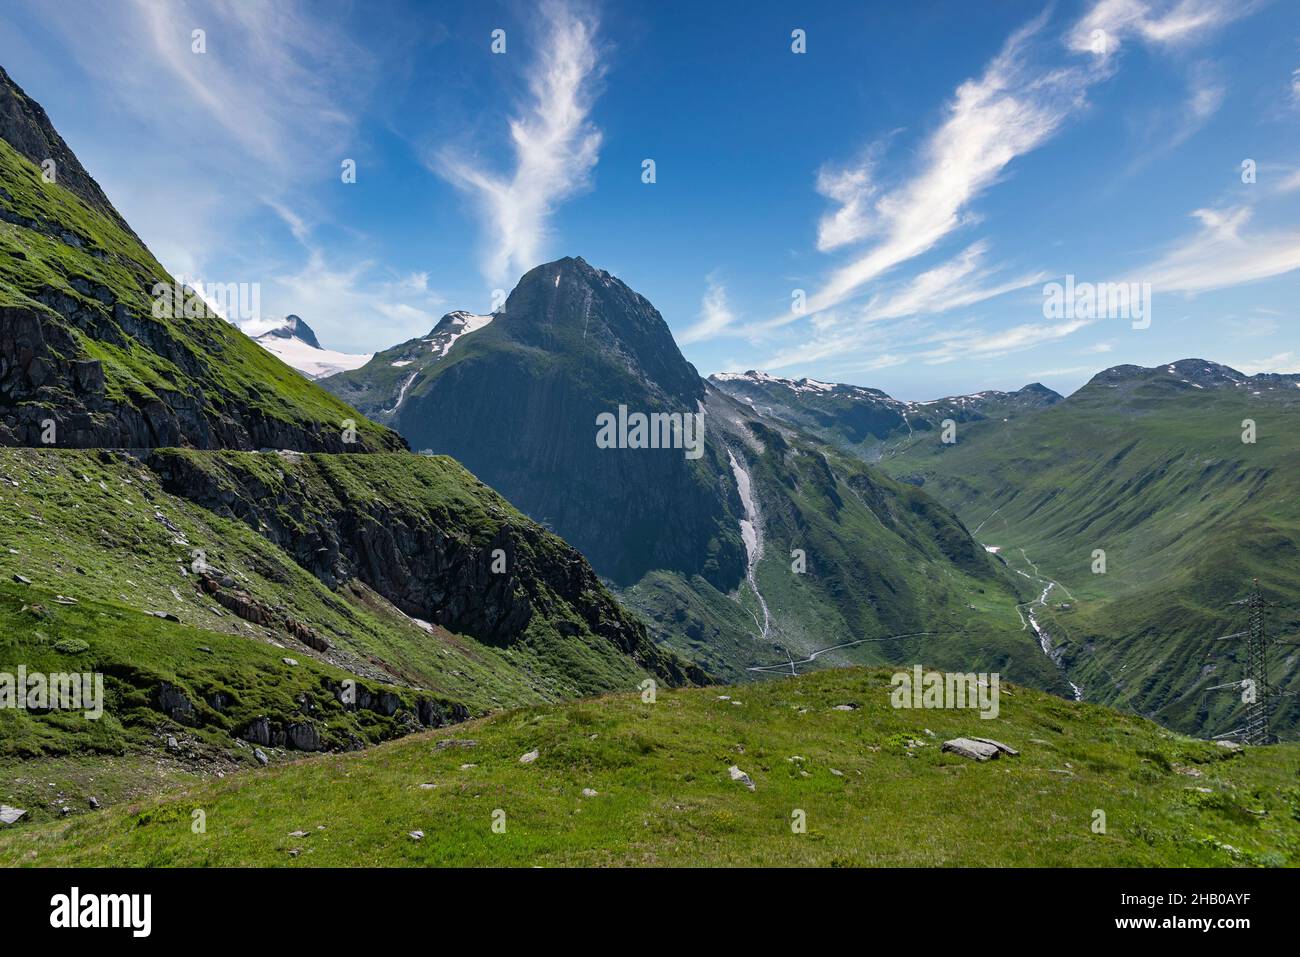 Alpine landscape near the Nufenen Pass with a view into the Leng Valley, Ulrichen, Valais, Switzerland, Europe Stock Photo